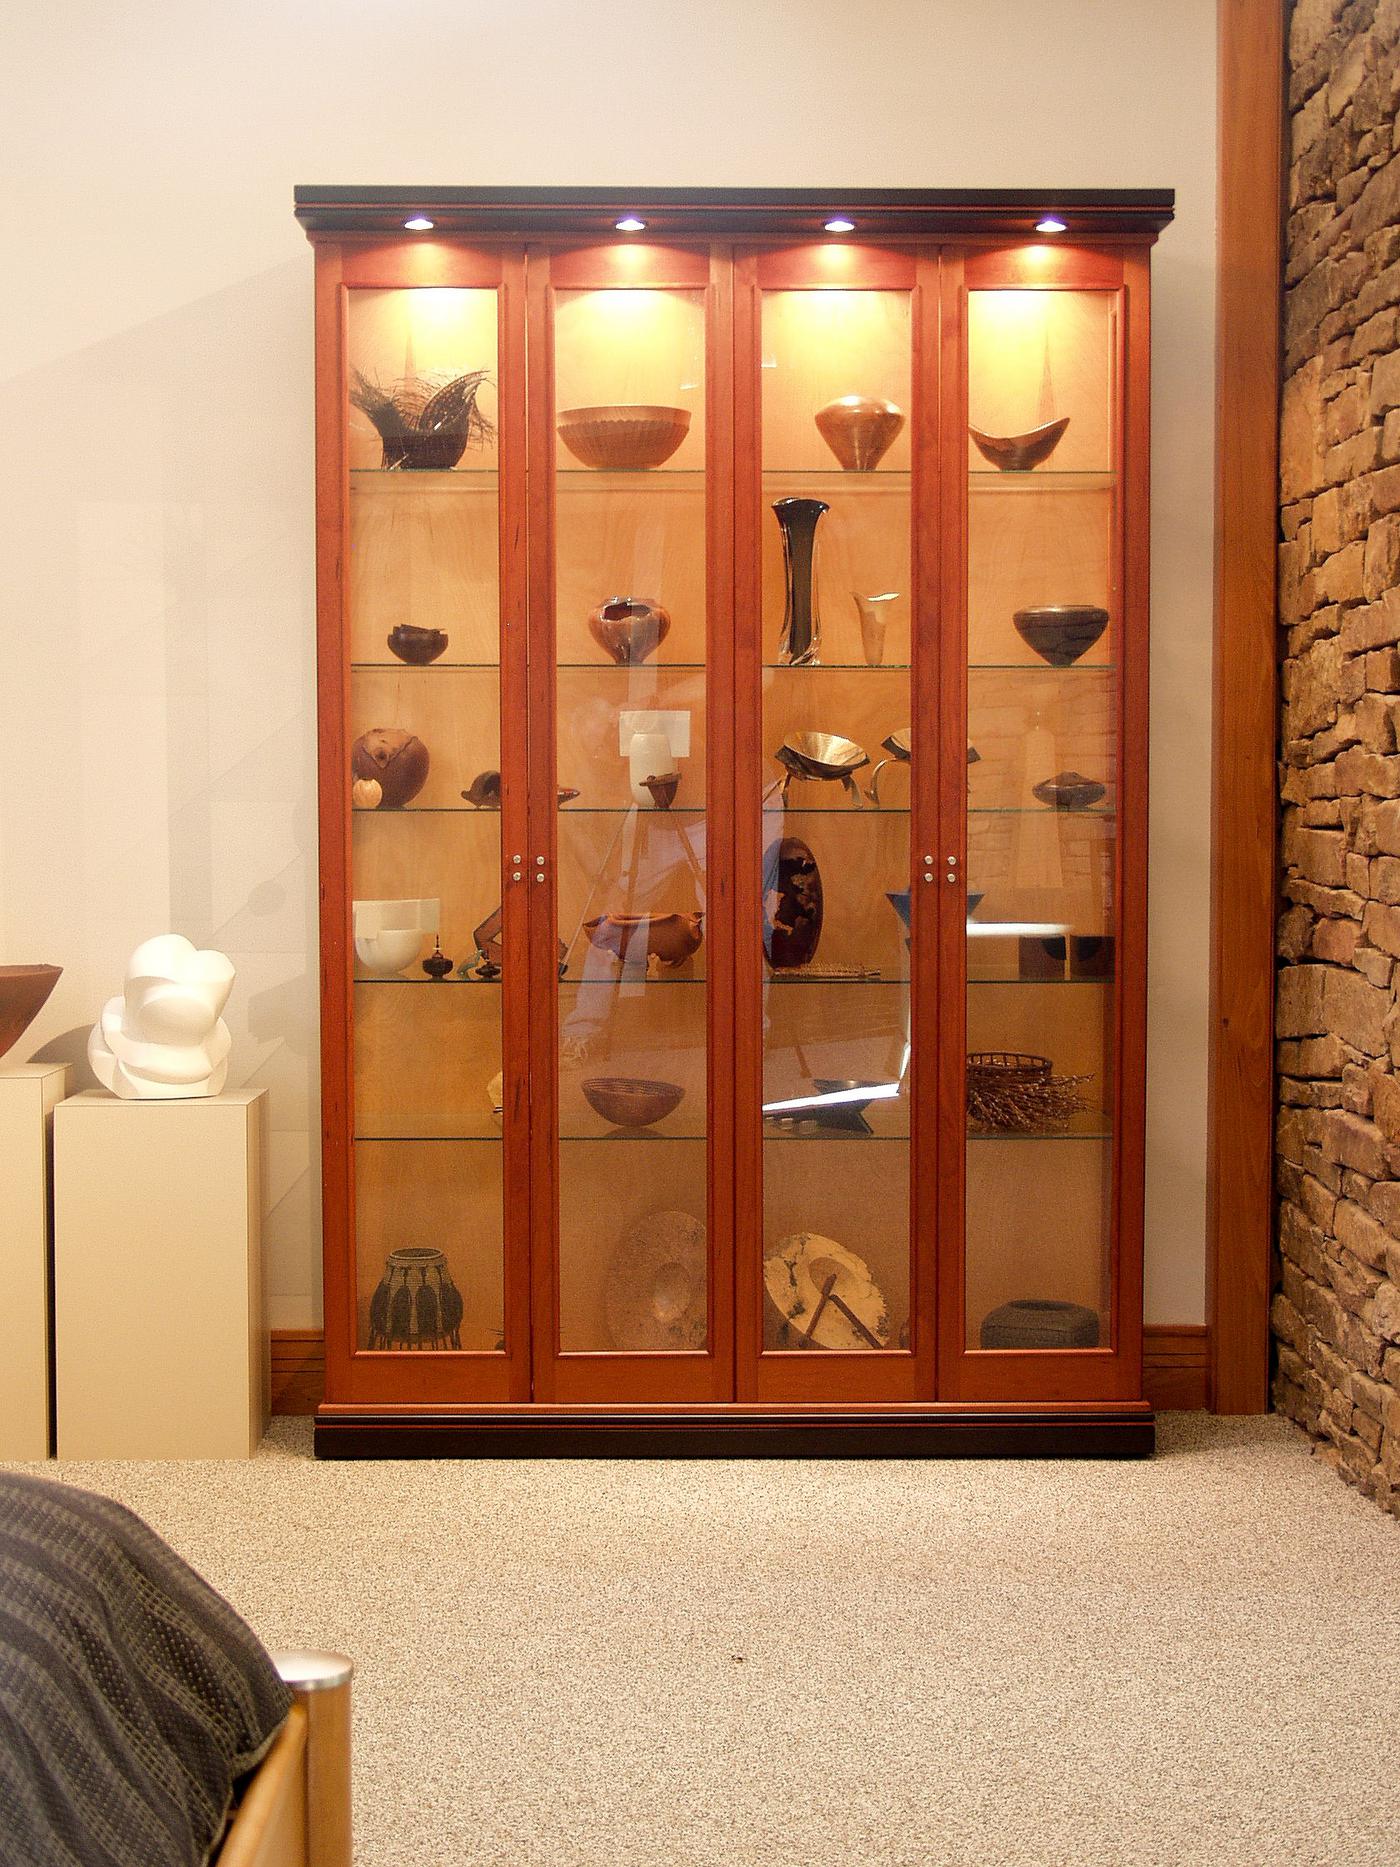 Lighted cherry display cabinet for art collection